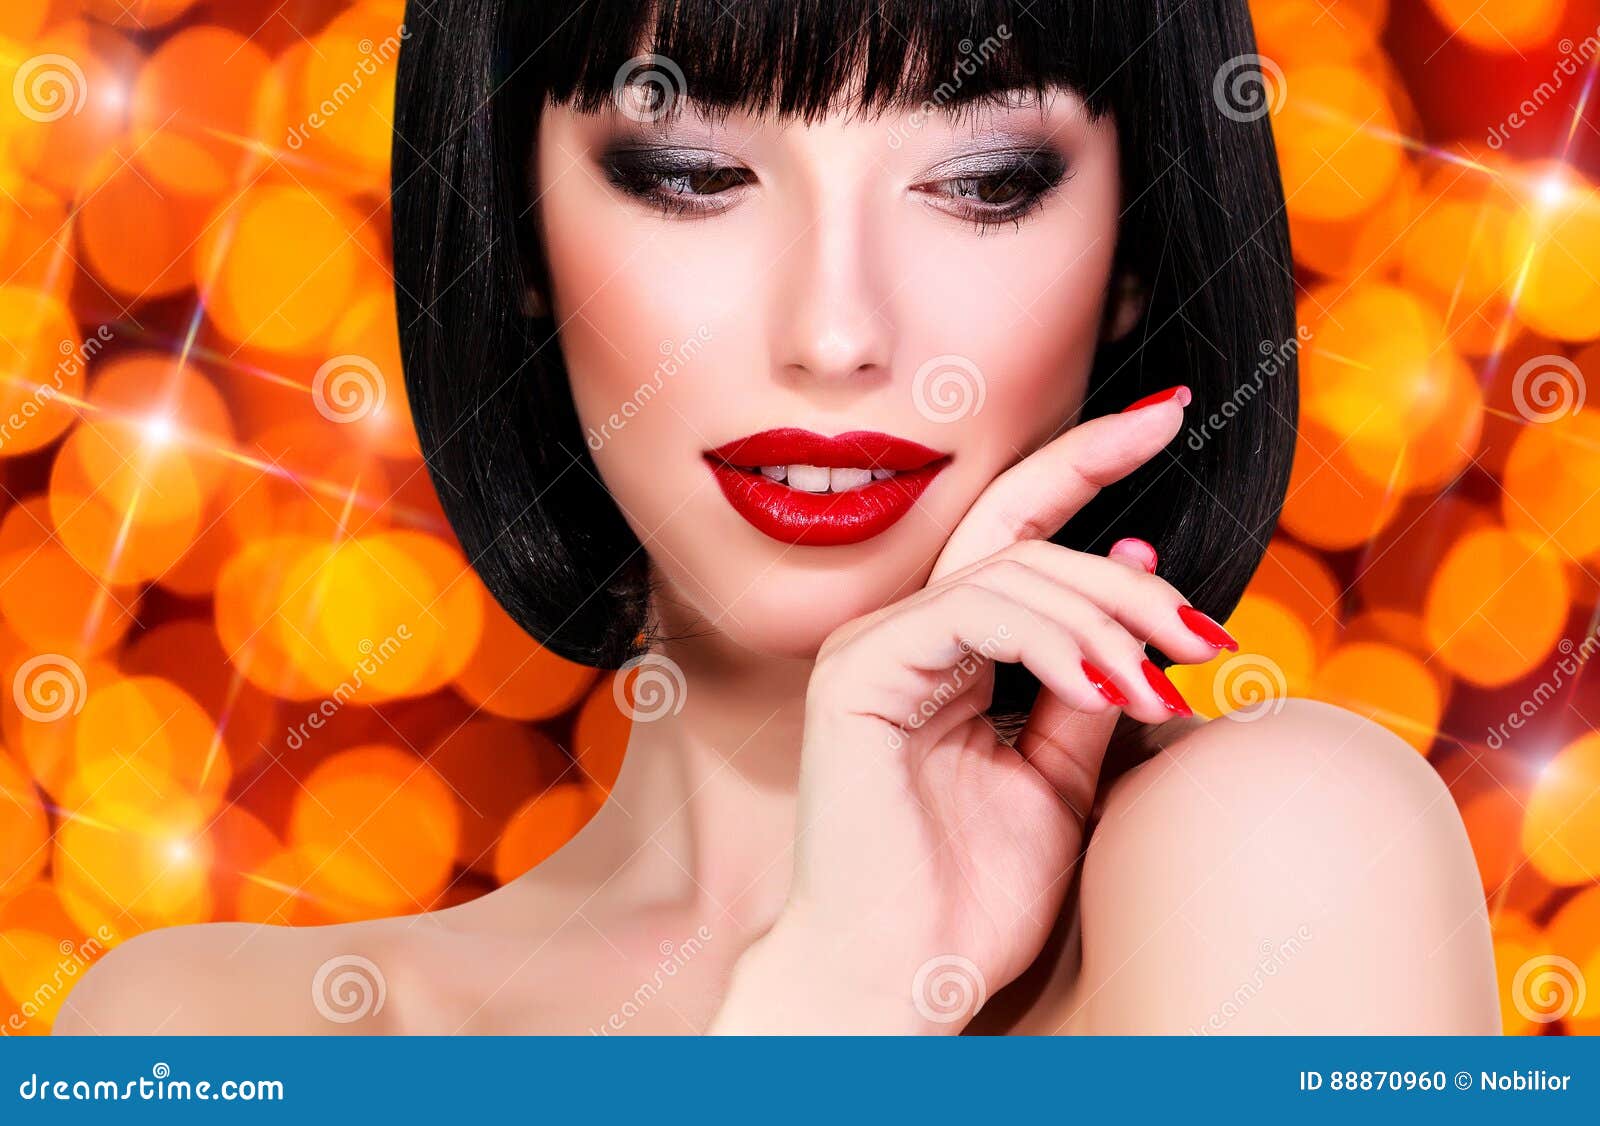 Pretty Woman Against an Abstract Background Stock Photo - Image of hair ...